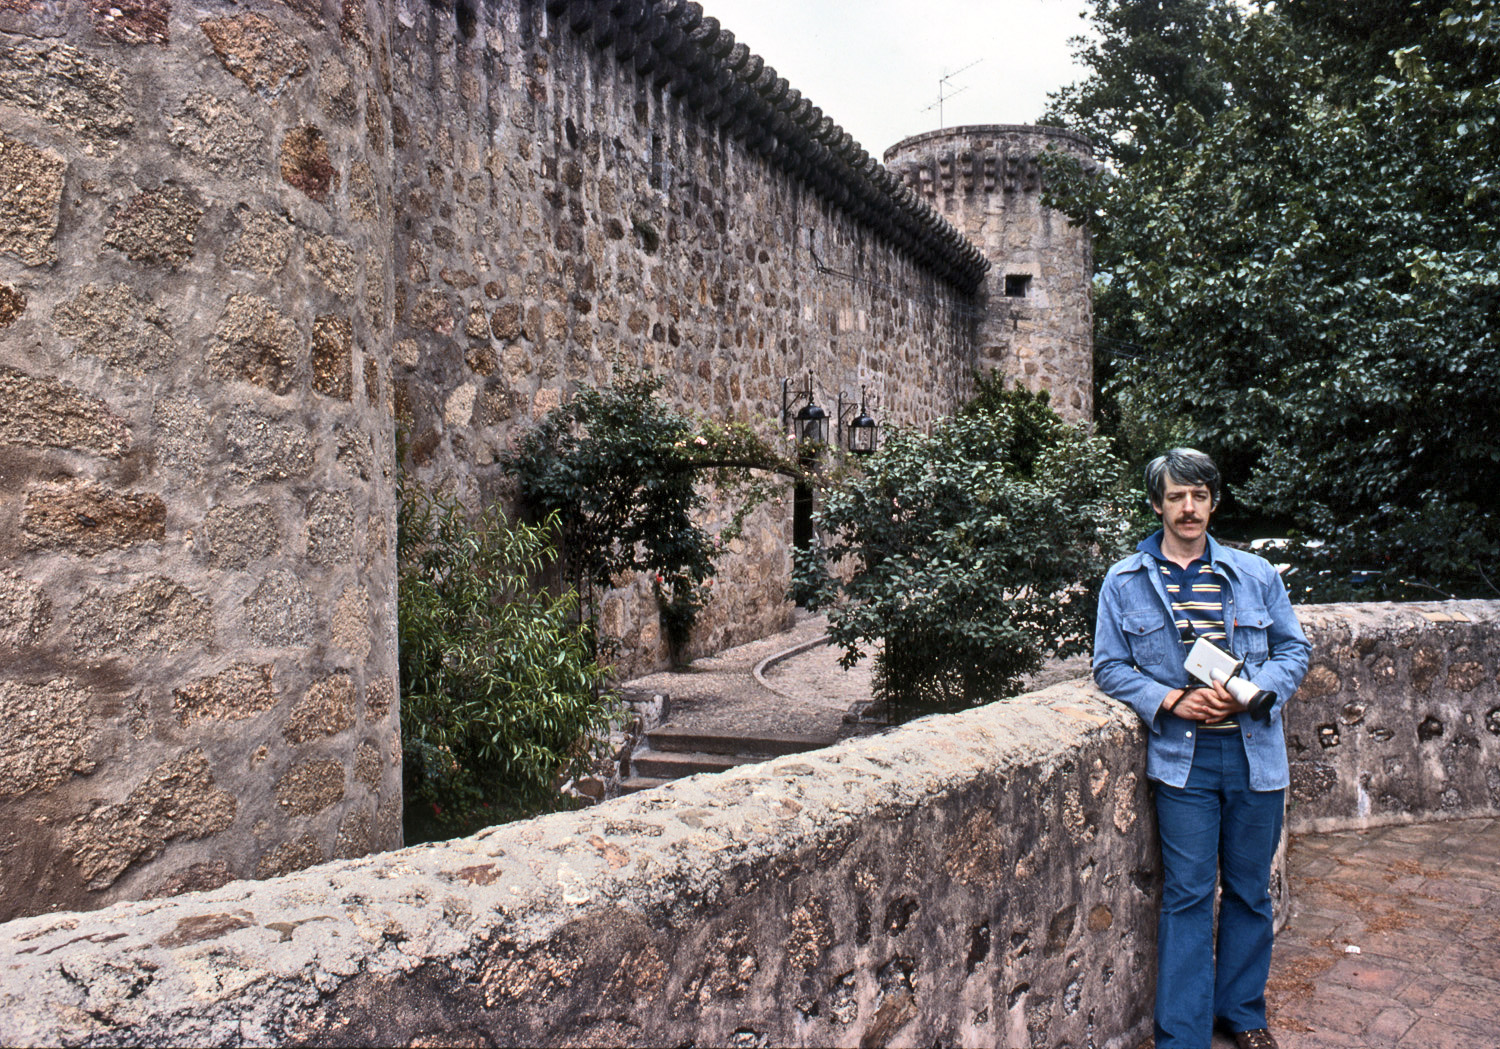 June 19, 1978. Apparently I hit the J.C. Penney men's department immediately before my trip to Spain. At any rate, here I am color-coordinated and looking inexplicably serious with my Nizo Super-8 movie camera at the parador Jarandilla de la Vera, Spain. My friend, who took this Koadachrome slide, and I paid ₧3676 for our one-night double, or about $48 then. Today, the same accommodations seem to be €166, or about $239.  History does not record what Emperor Charles V paid when he stayed here in the 16th Century, nor what he watched on TV. No doubt he was better-dressed.

Now that I think about it, my expression may be the result of jet-lag; this was the day after we arrived. My friend and I tried to avoid it by gradually adjusting our sleep schedule to Europe time for a week or so before departure, staying up later and later each night watching old movies on TV and playing card and board games. It didn't really work. We did document it in a series of rather amusing photos, though. View full size.